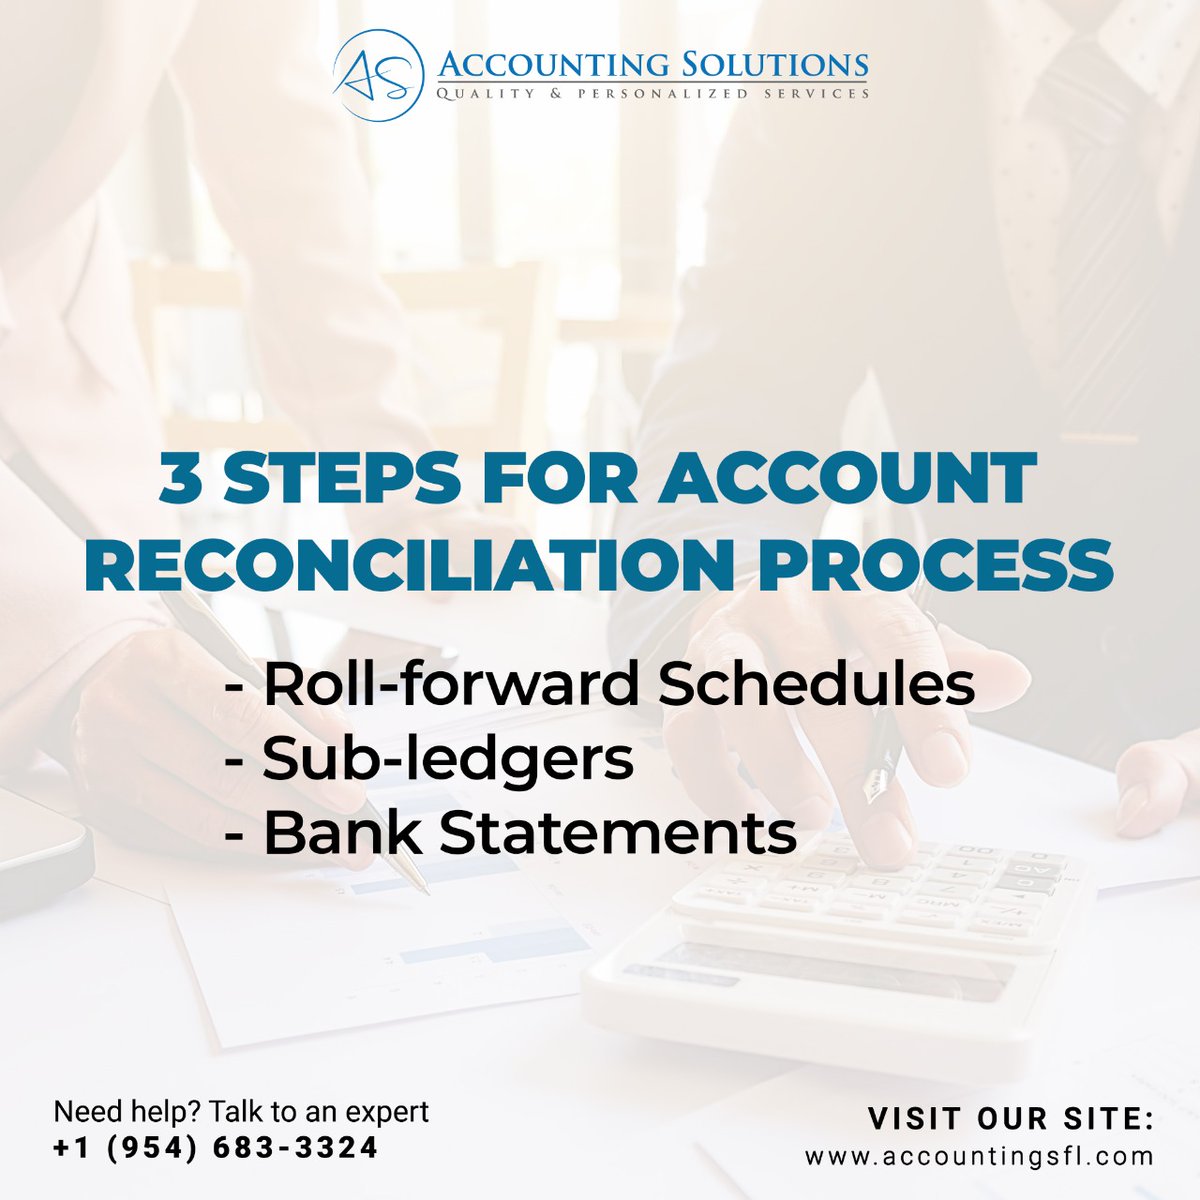 The technique can further assist you in managing your cash flow and identifying any inefficiencies as a business. Visit for more info: accountingsfl.com/importance-of-…

#financialrecords #bankrecords #accountingerrors #business #accountrecocilation #AccountingSolutions #SouthFlorida